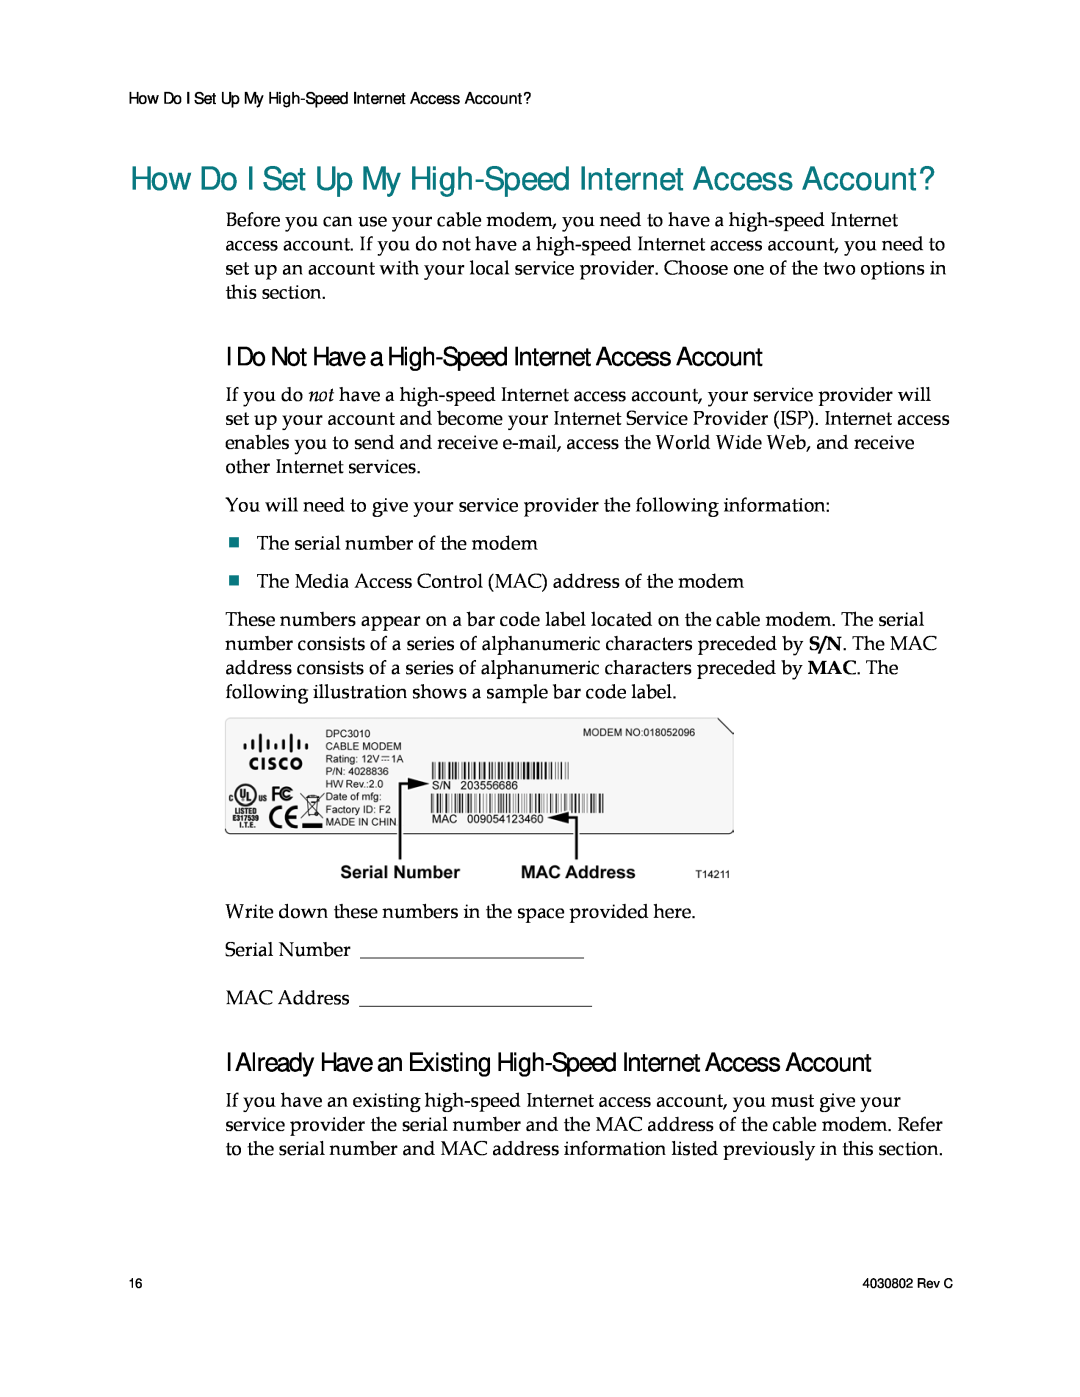 Cisco Systems 4027668, AAC400210112234 important safety instructions How Do I Set Up My High-Speed Internet Access Account? 